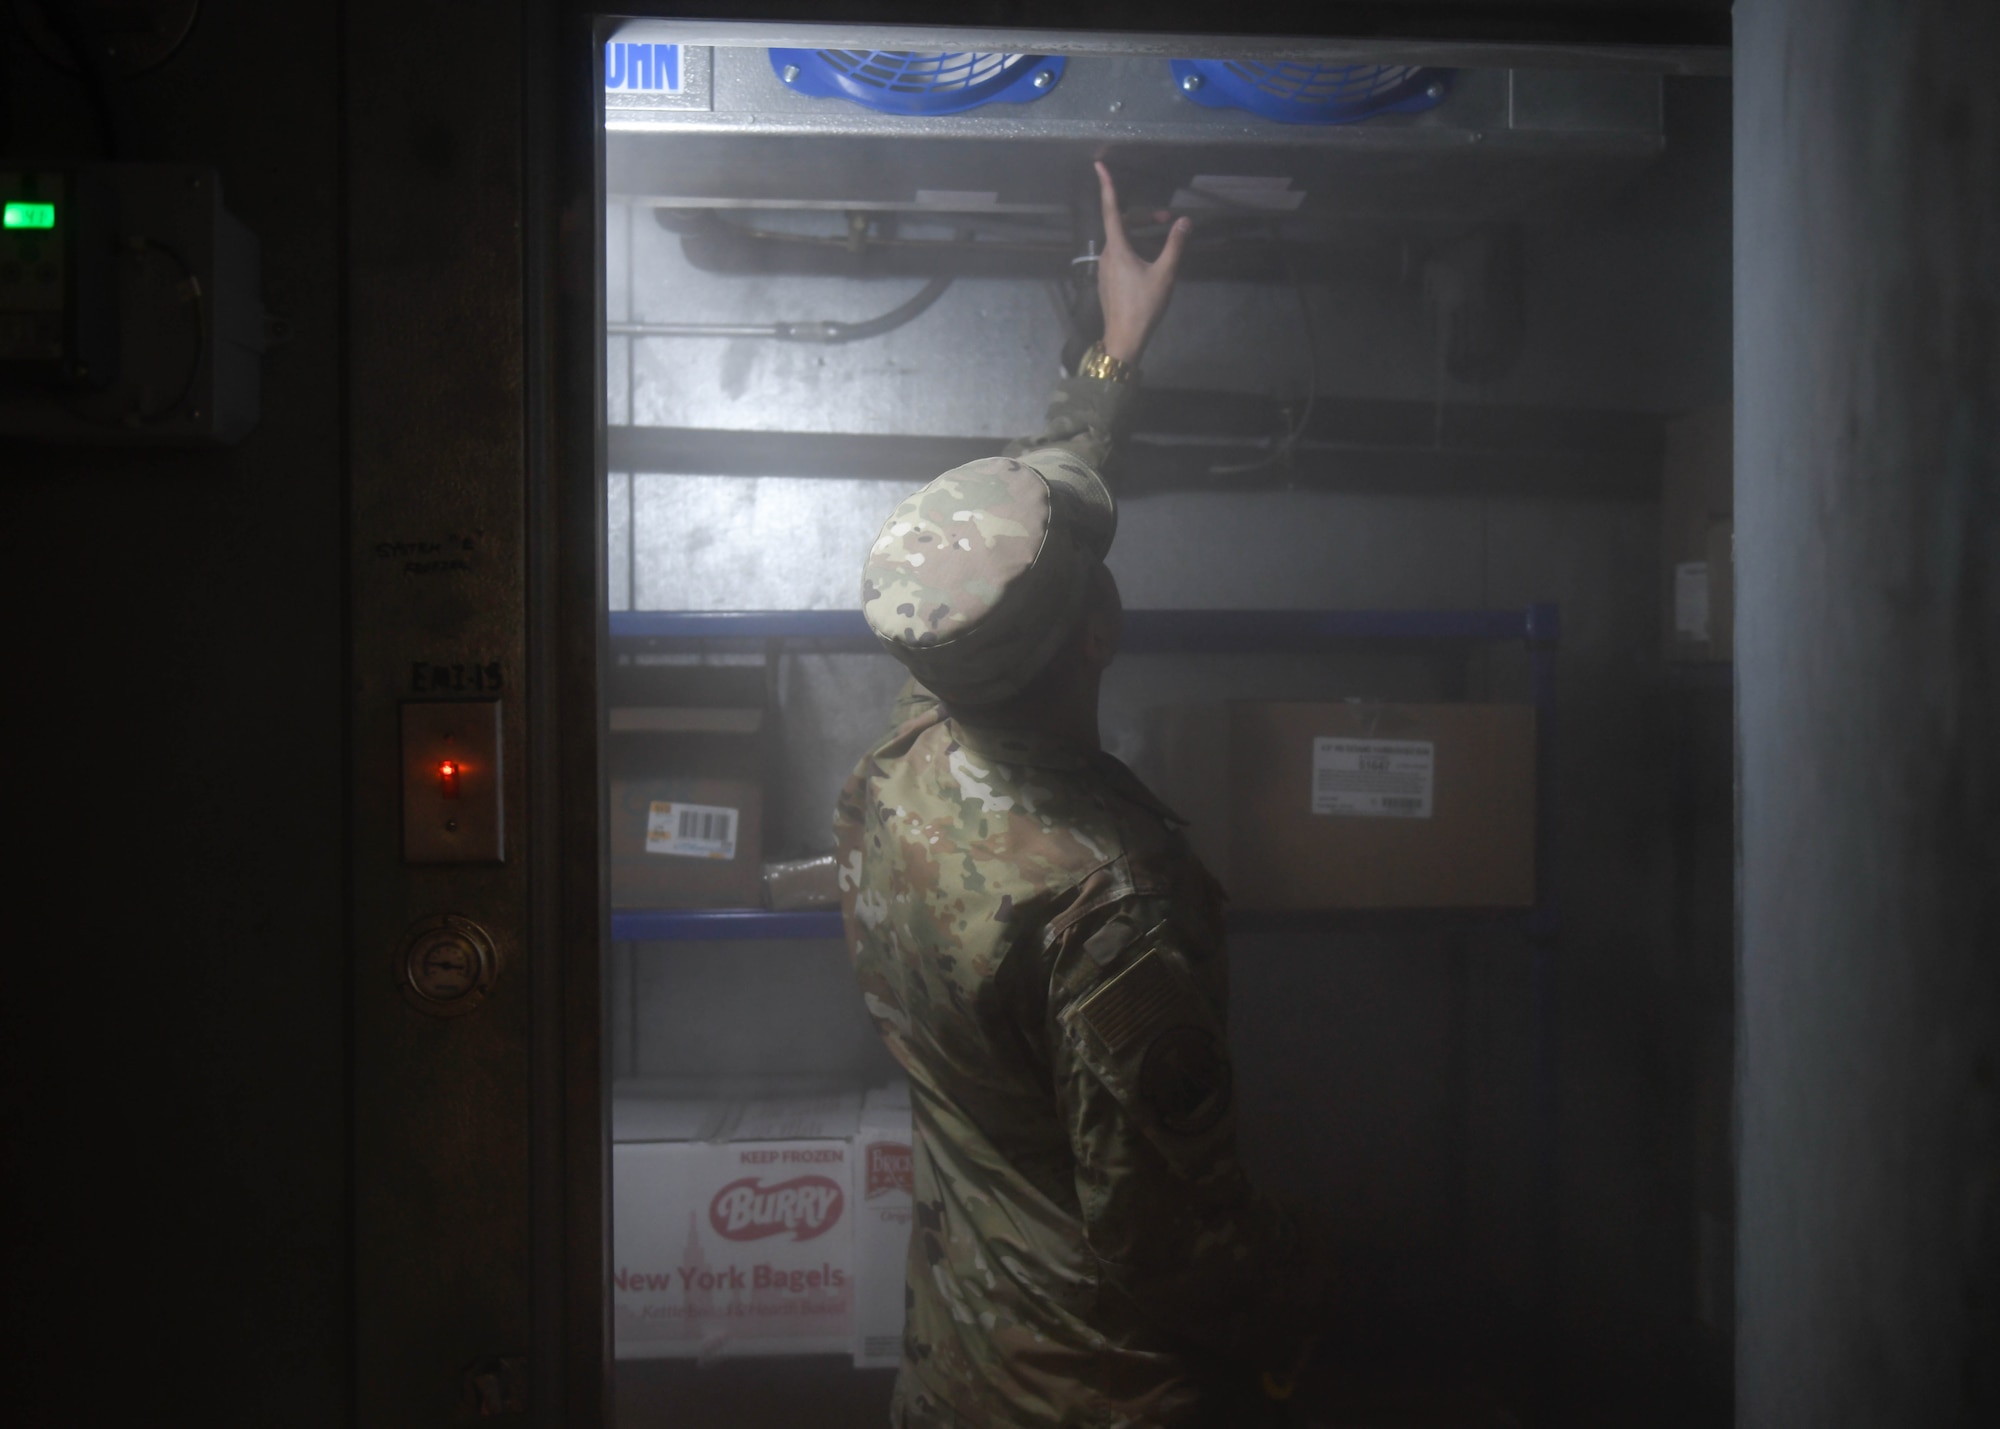 Staff Sgt. Joseph Deguino, 56th Operational Medicine Readiness Squadron Public Health communicable disease noncommissioned officer in charge, examines a freezer during a monthly inspection Jan. 27, 2020, in Club 5/6 at Luke Air Force Base, Ariz. While inspecting the freezer, Deguino looks for debris that could possibly cross-contaminate food. Public health helps keep Airmen healthy, ready to train and deploy by inspecting facilities for food quality, performing audiograms and more. (U.S. Air Force photo by Airman 1st Class by Brooke Moeder)